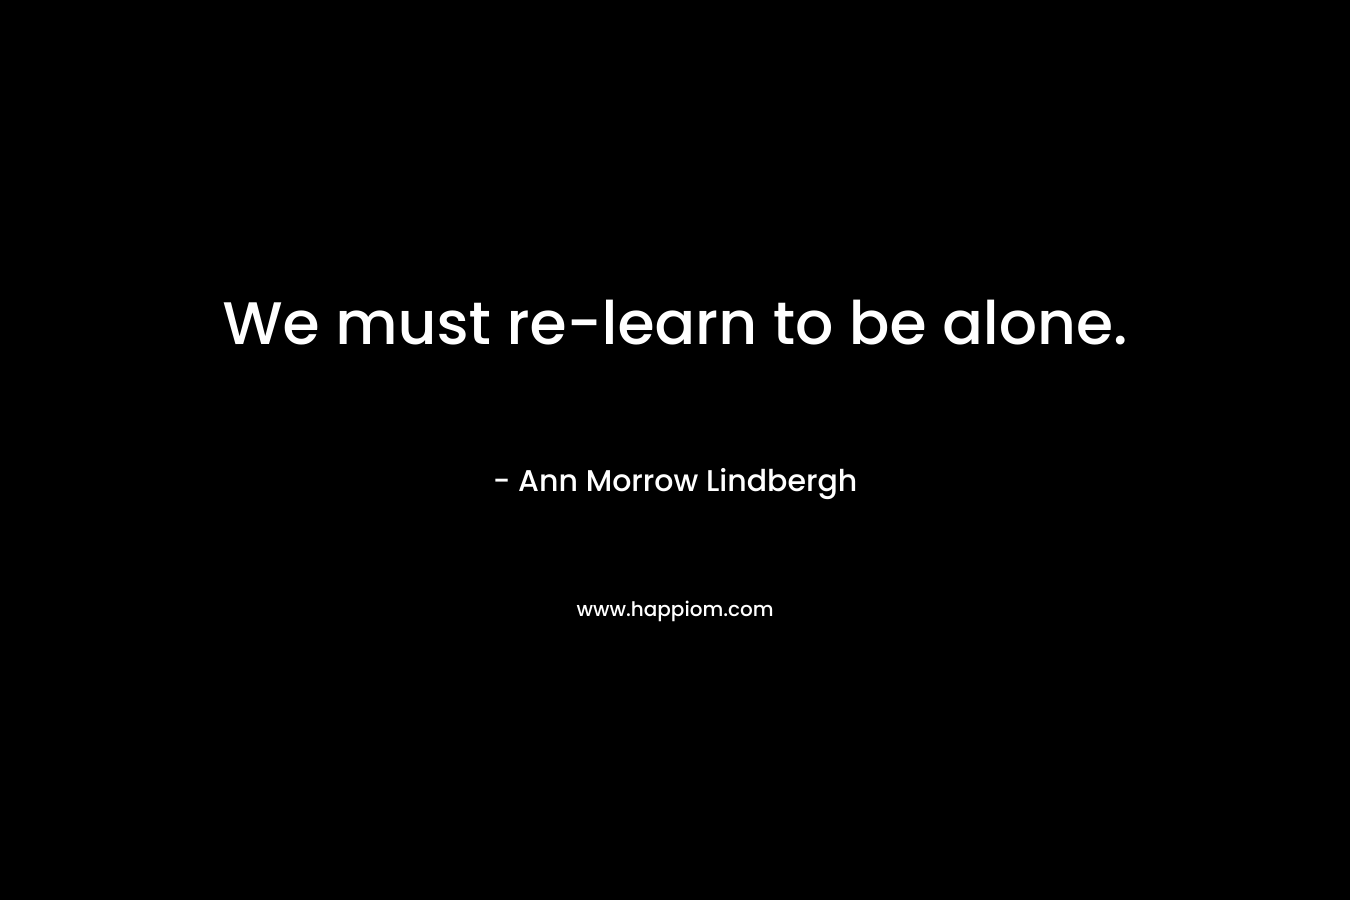 We must re-learn to be alone.